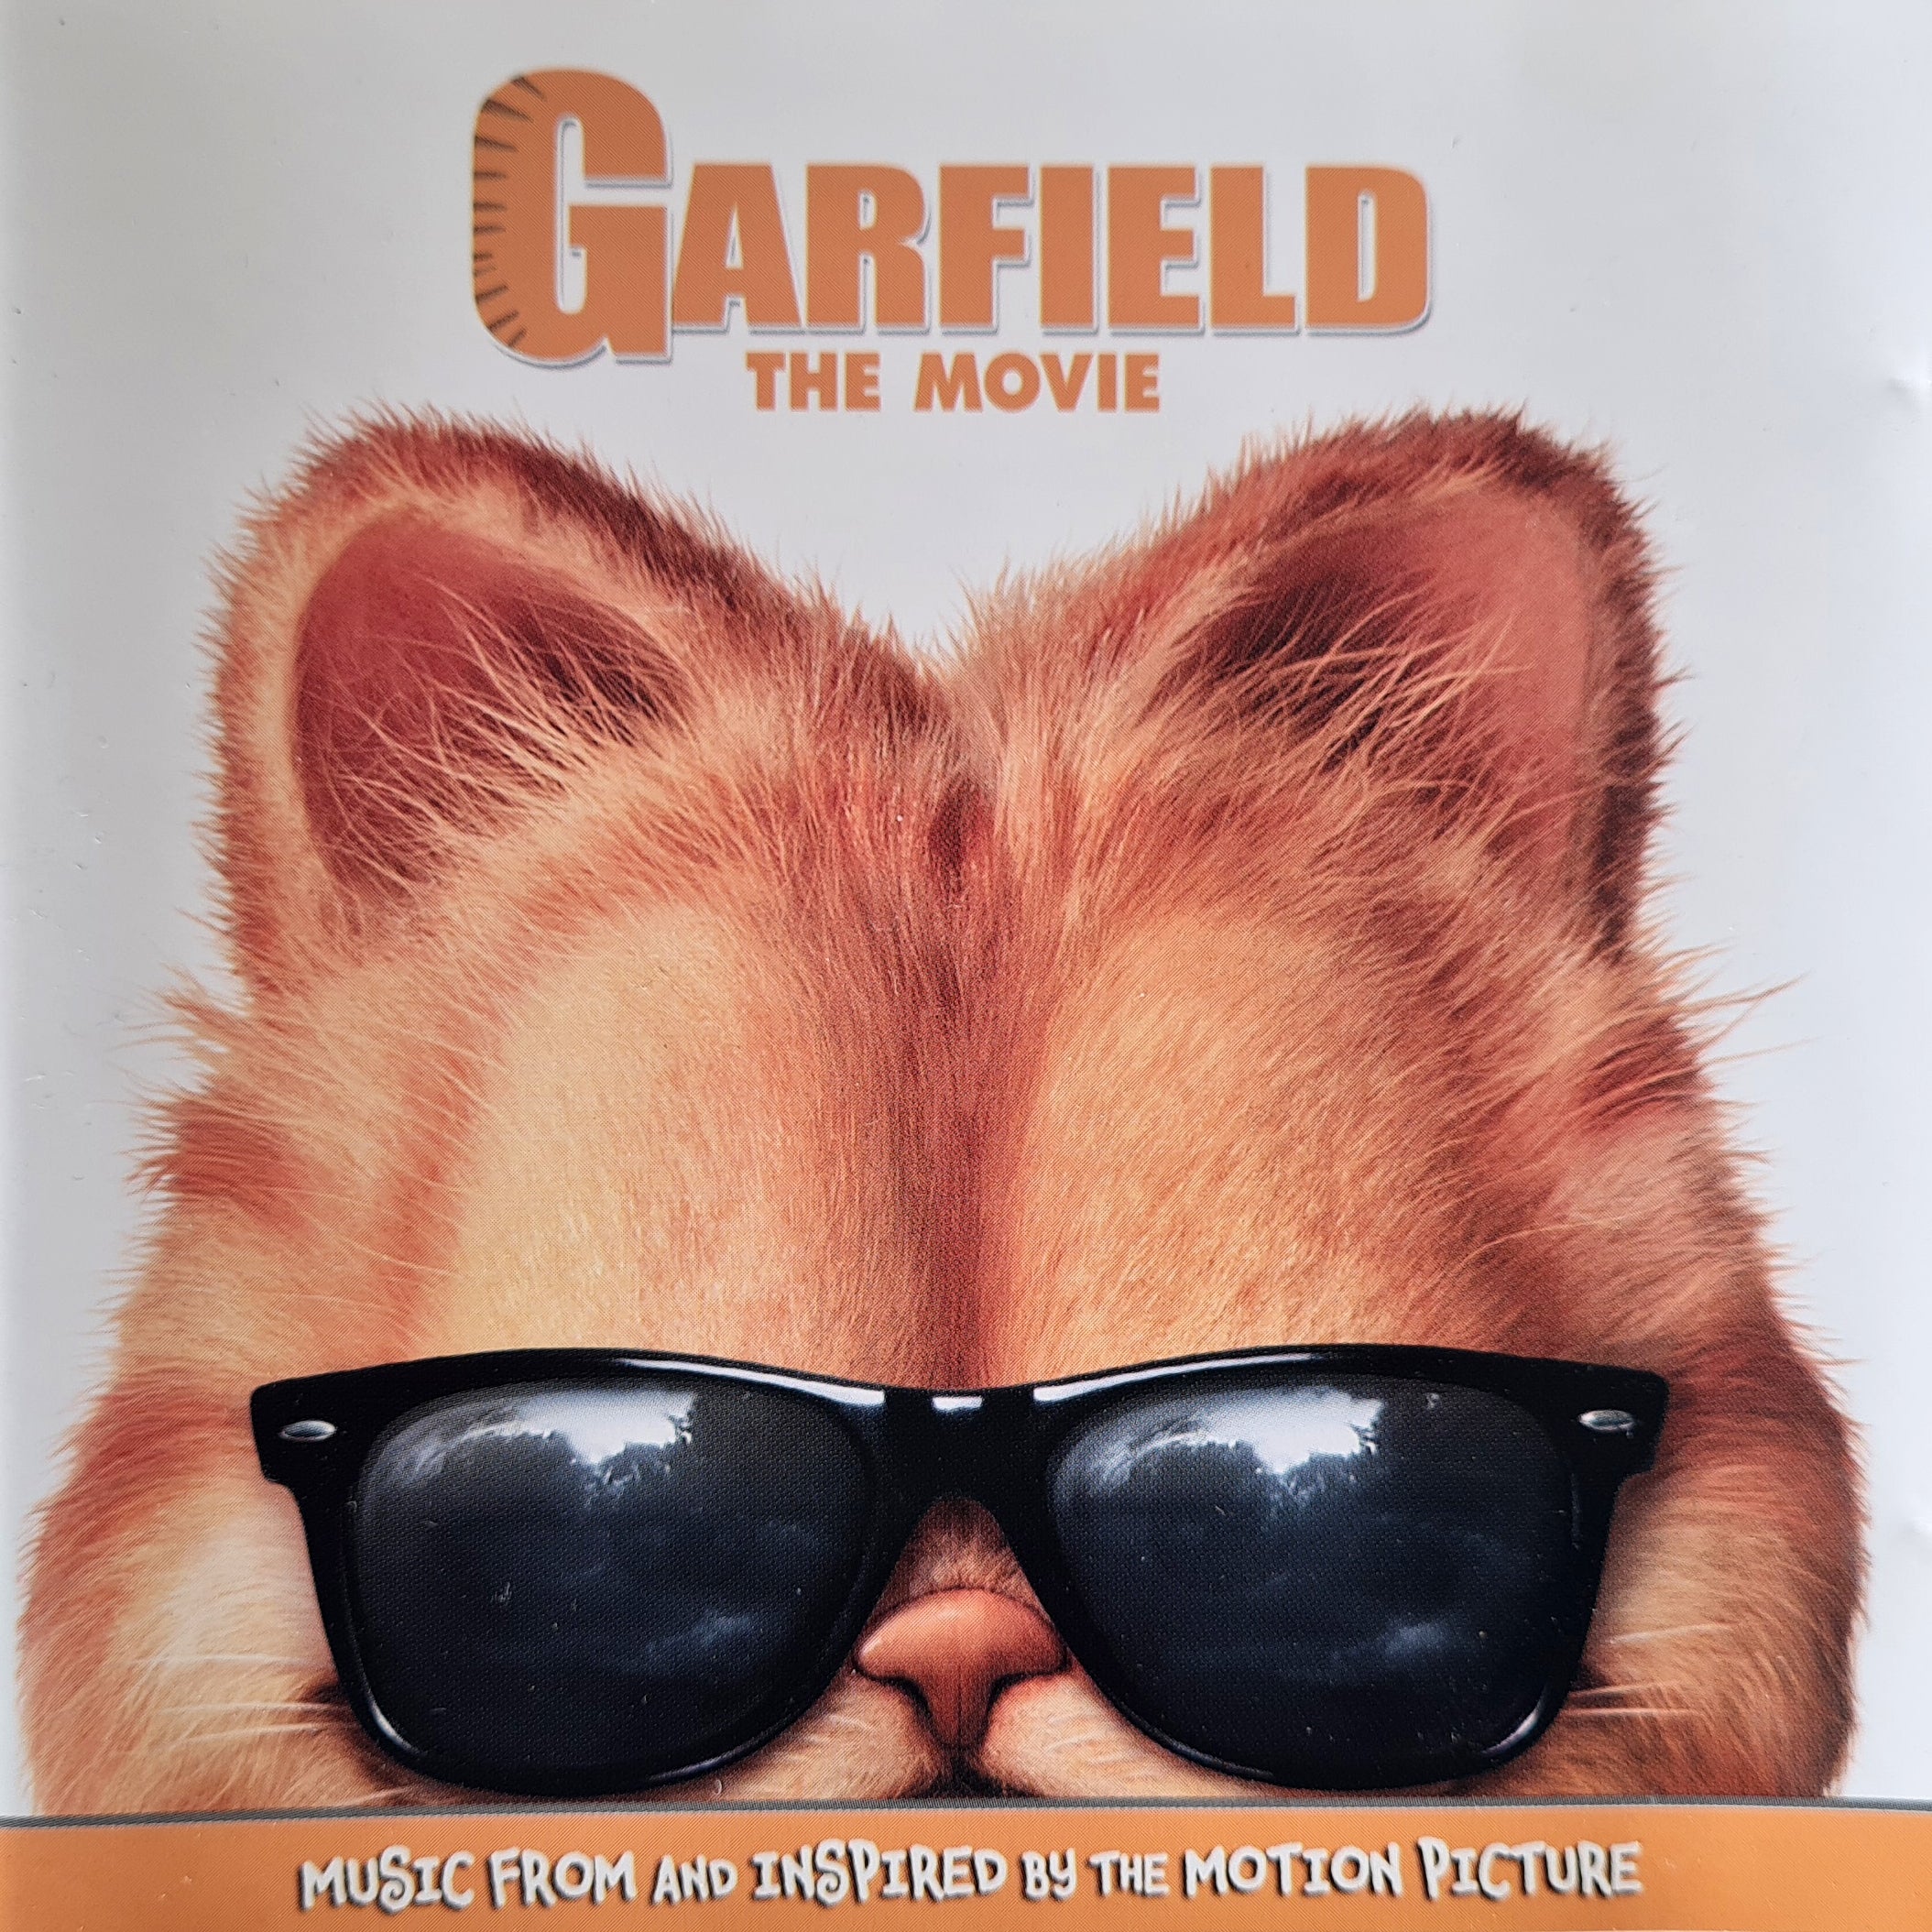 Garfield The Movie - Music from and Inspired by the Motion Picture (CD)